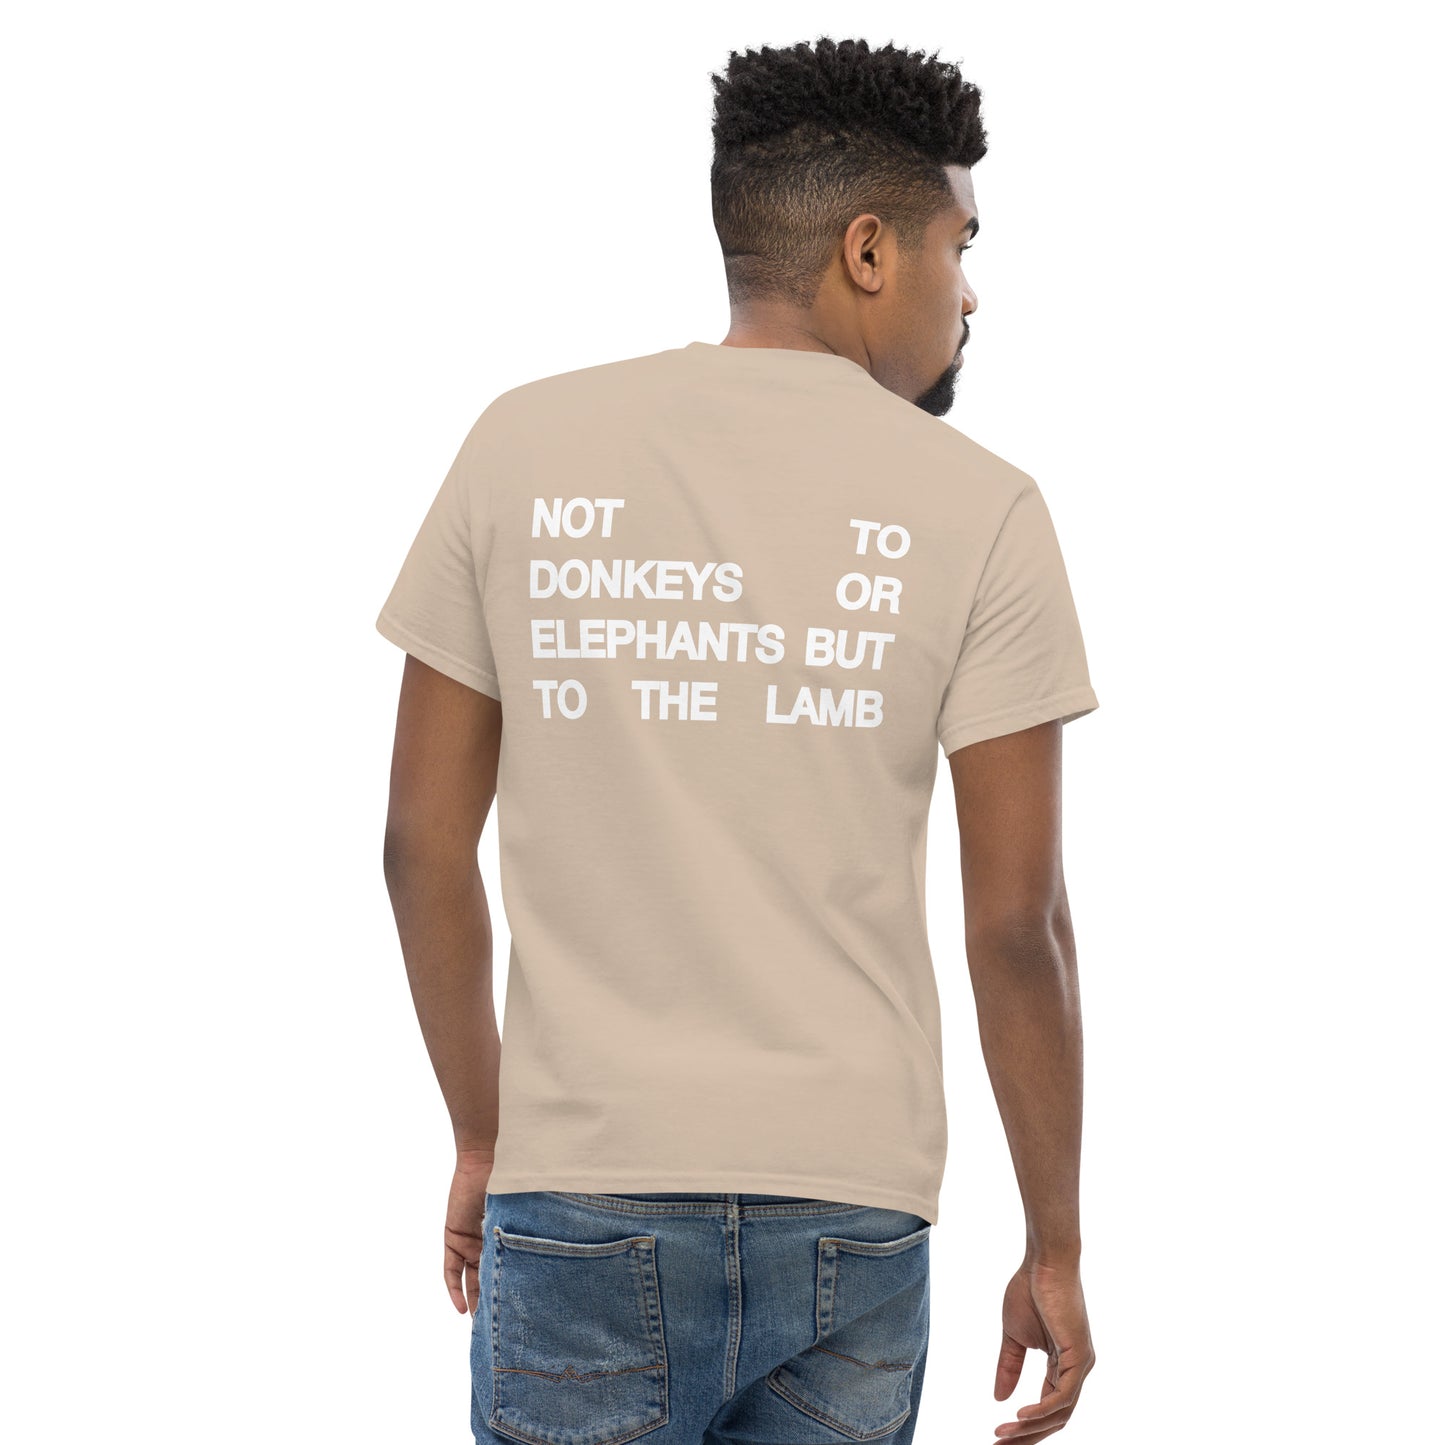 To the Lamb T